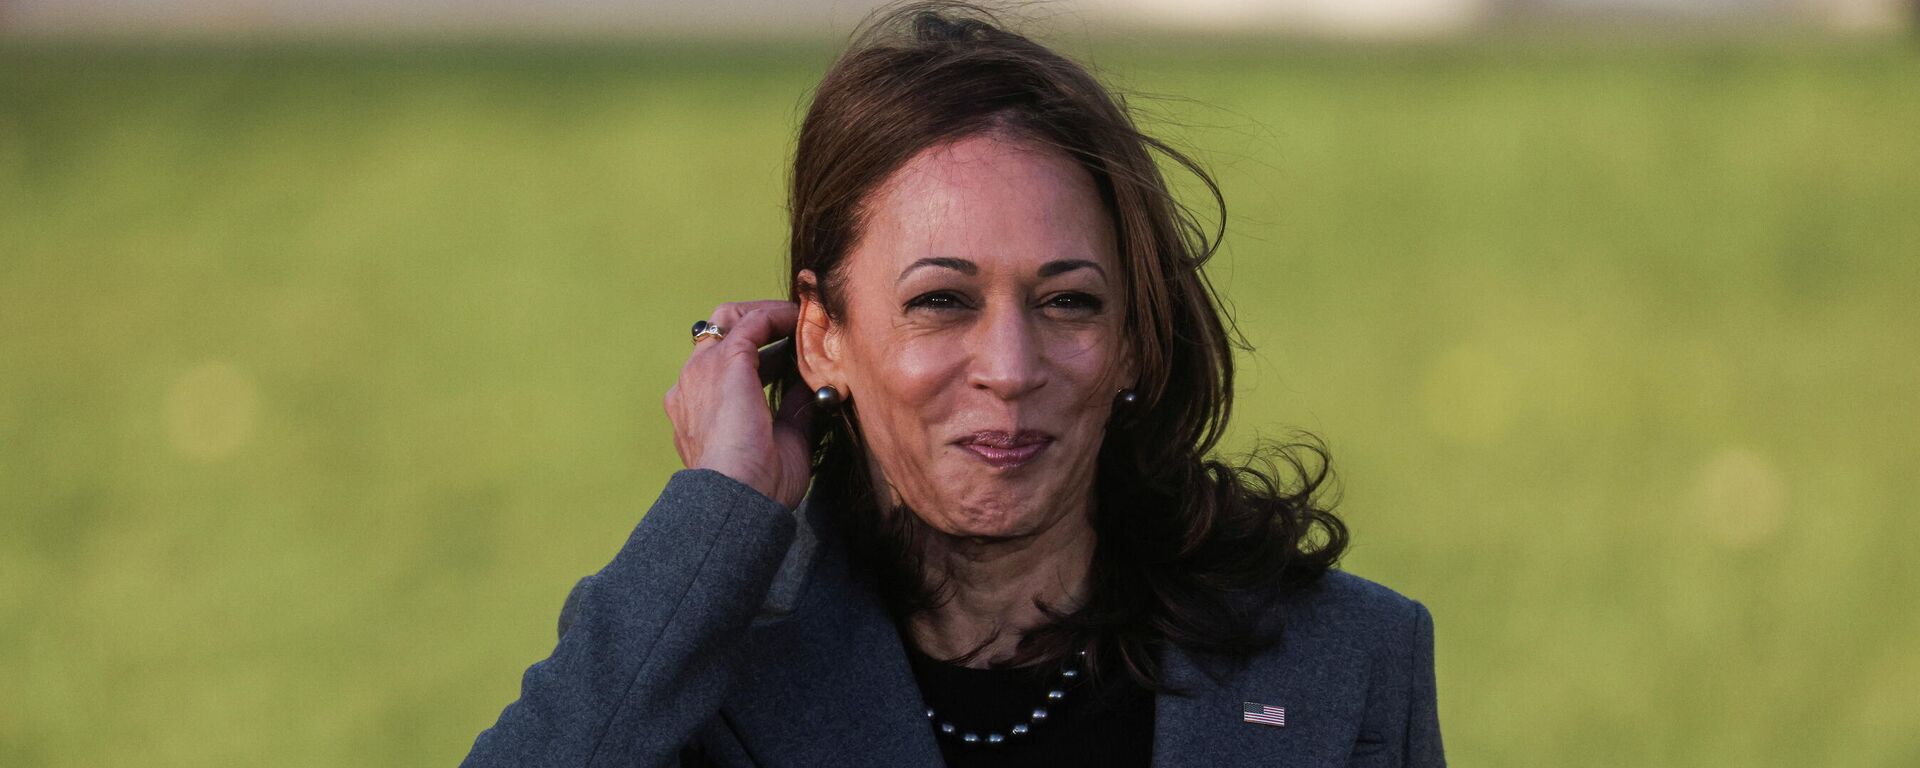 U.S. Vice-President Kamala Harris reacts at the ceremony where U.S. President Joe Biden will sign the Infrastructure Investment and Jobs Act, on the South Lawn at the White House in Washington, U.S., November 15, 2021 - Sputnik International, 1920, 19.11.2021